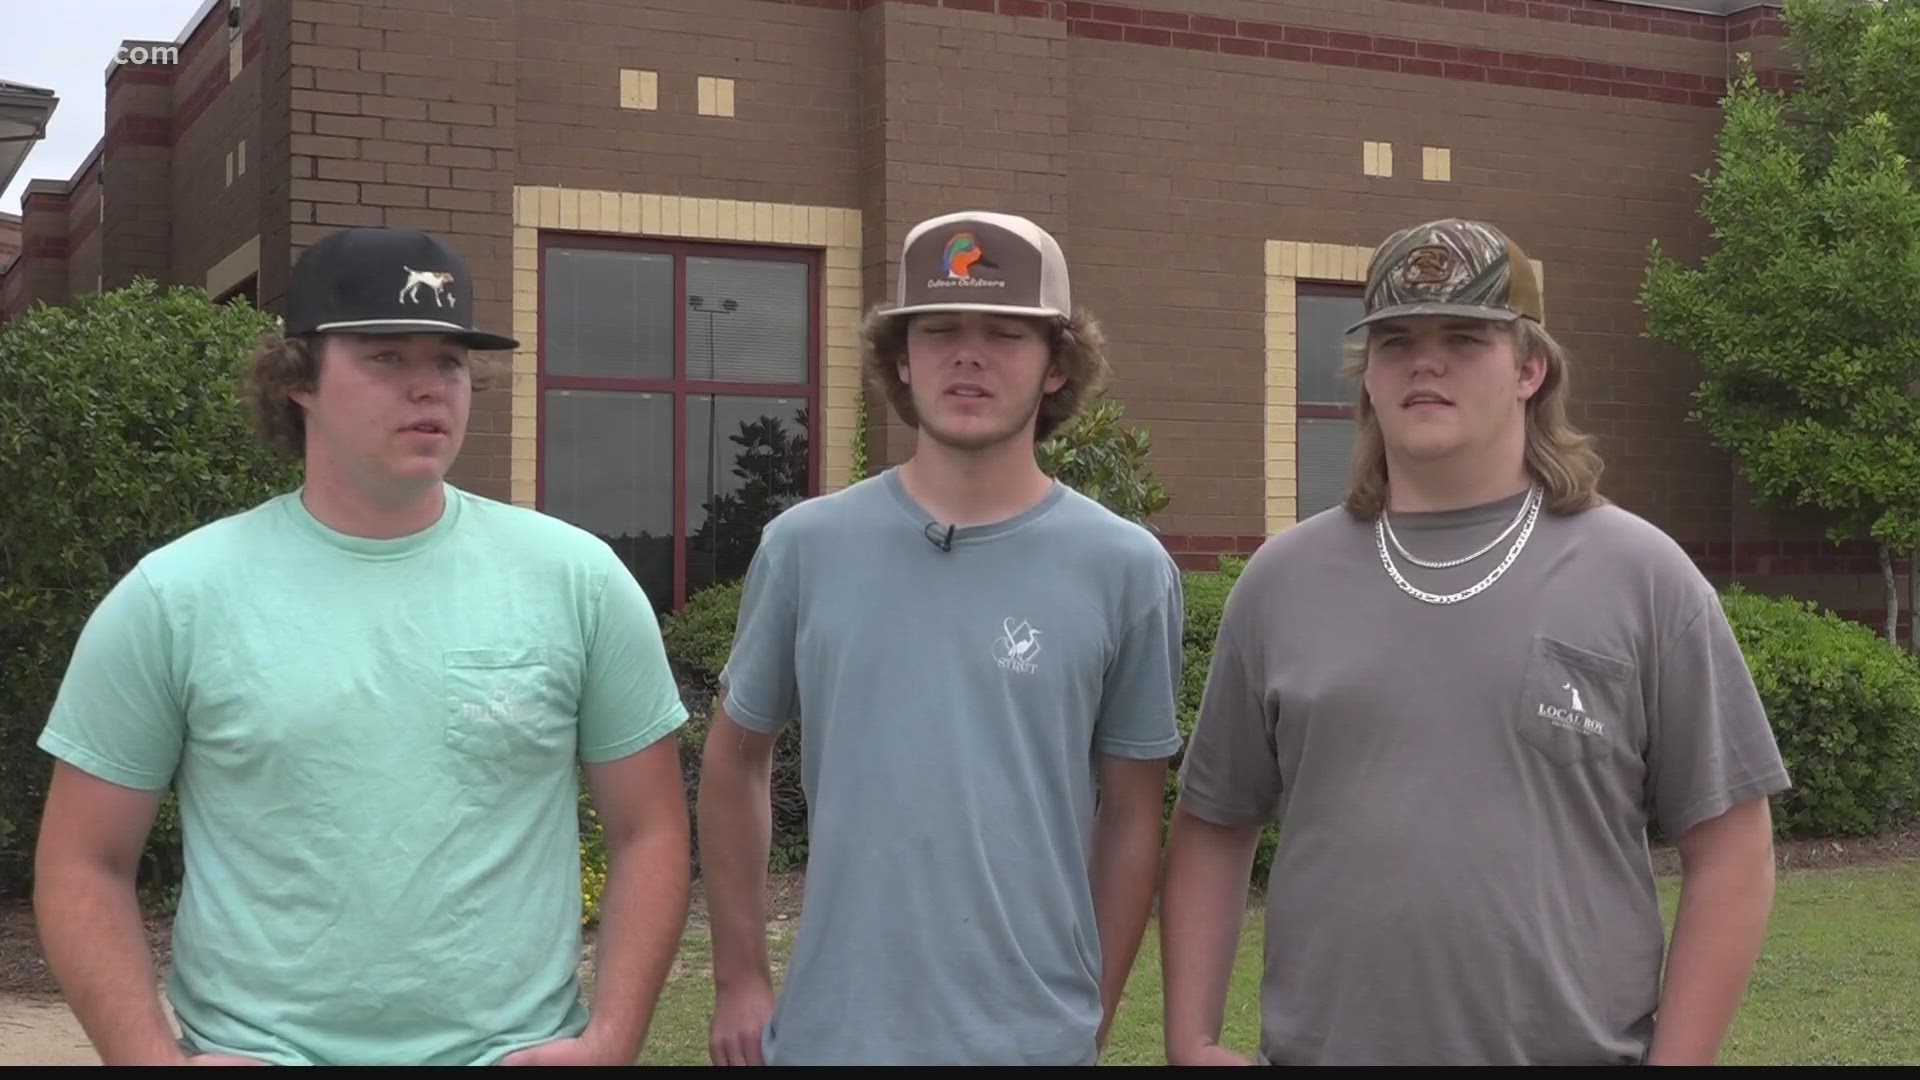 Three Gilbert high schoolers are being called heroes after helping fire victims on their way to school.